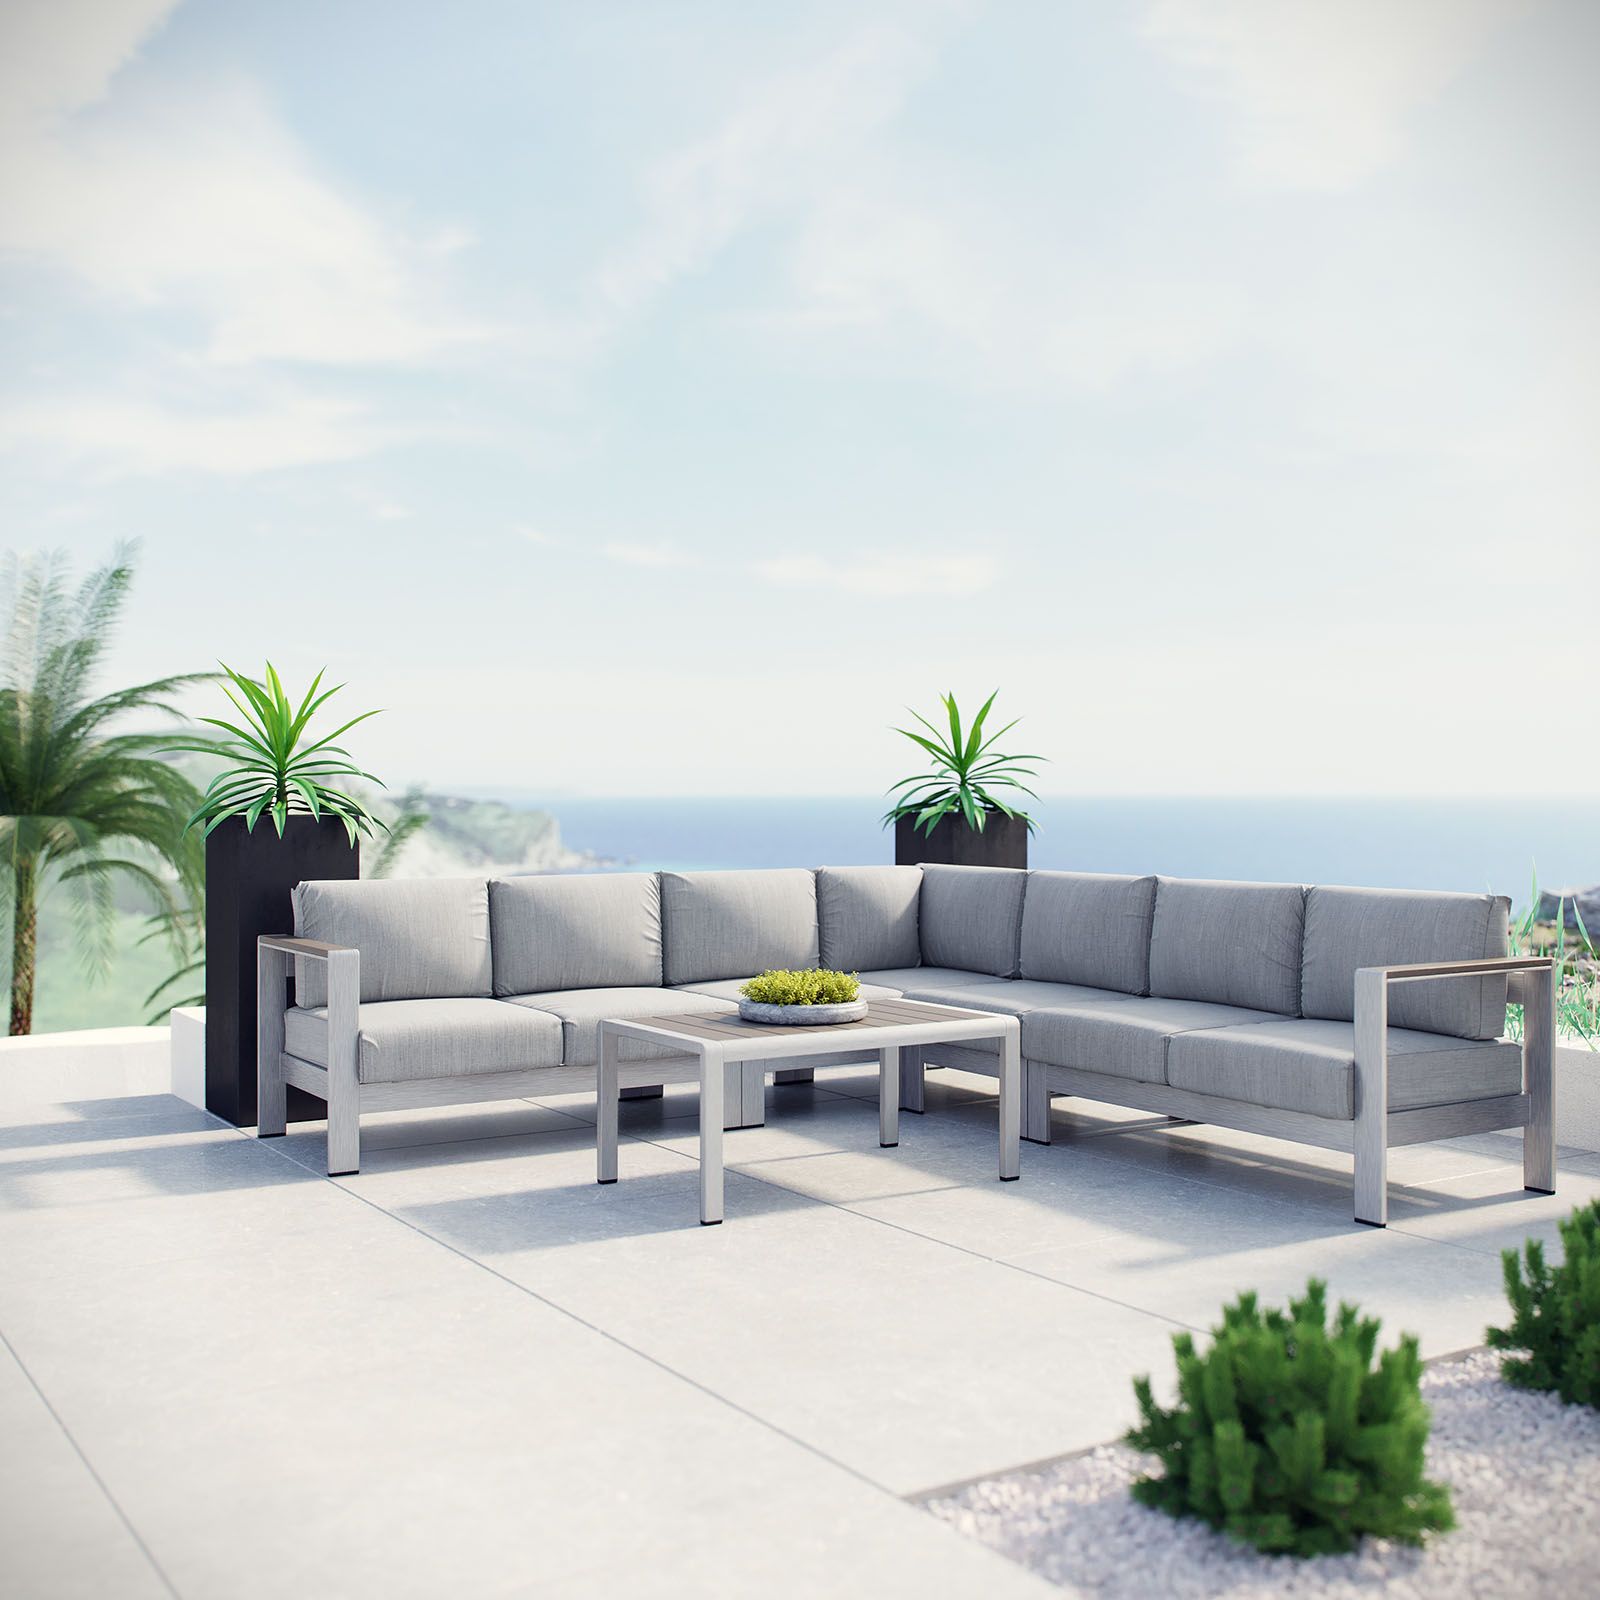 Most Up To Date Shore 6 Piece Outdoor Patio Aluminum Sectional Sofa Set Silver Gray In 6 Piece Outdoor Sectional Sofa Patio Sets (View 2 of 15)